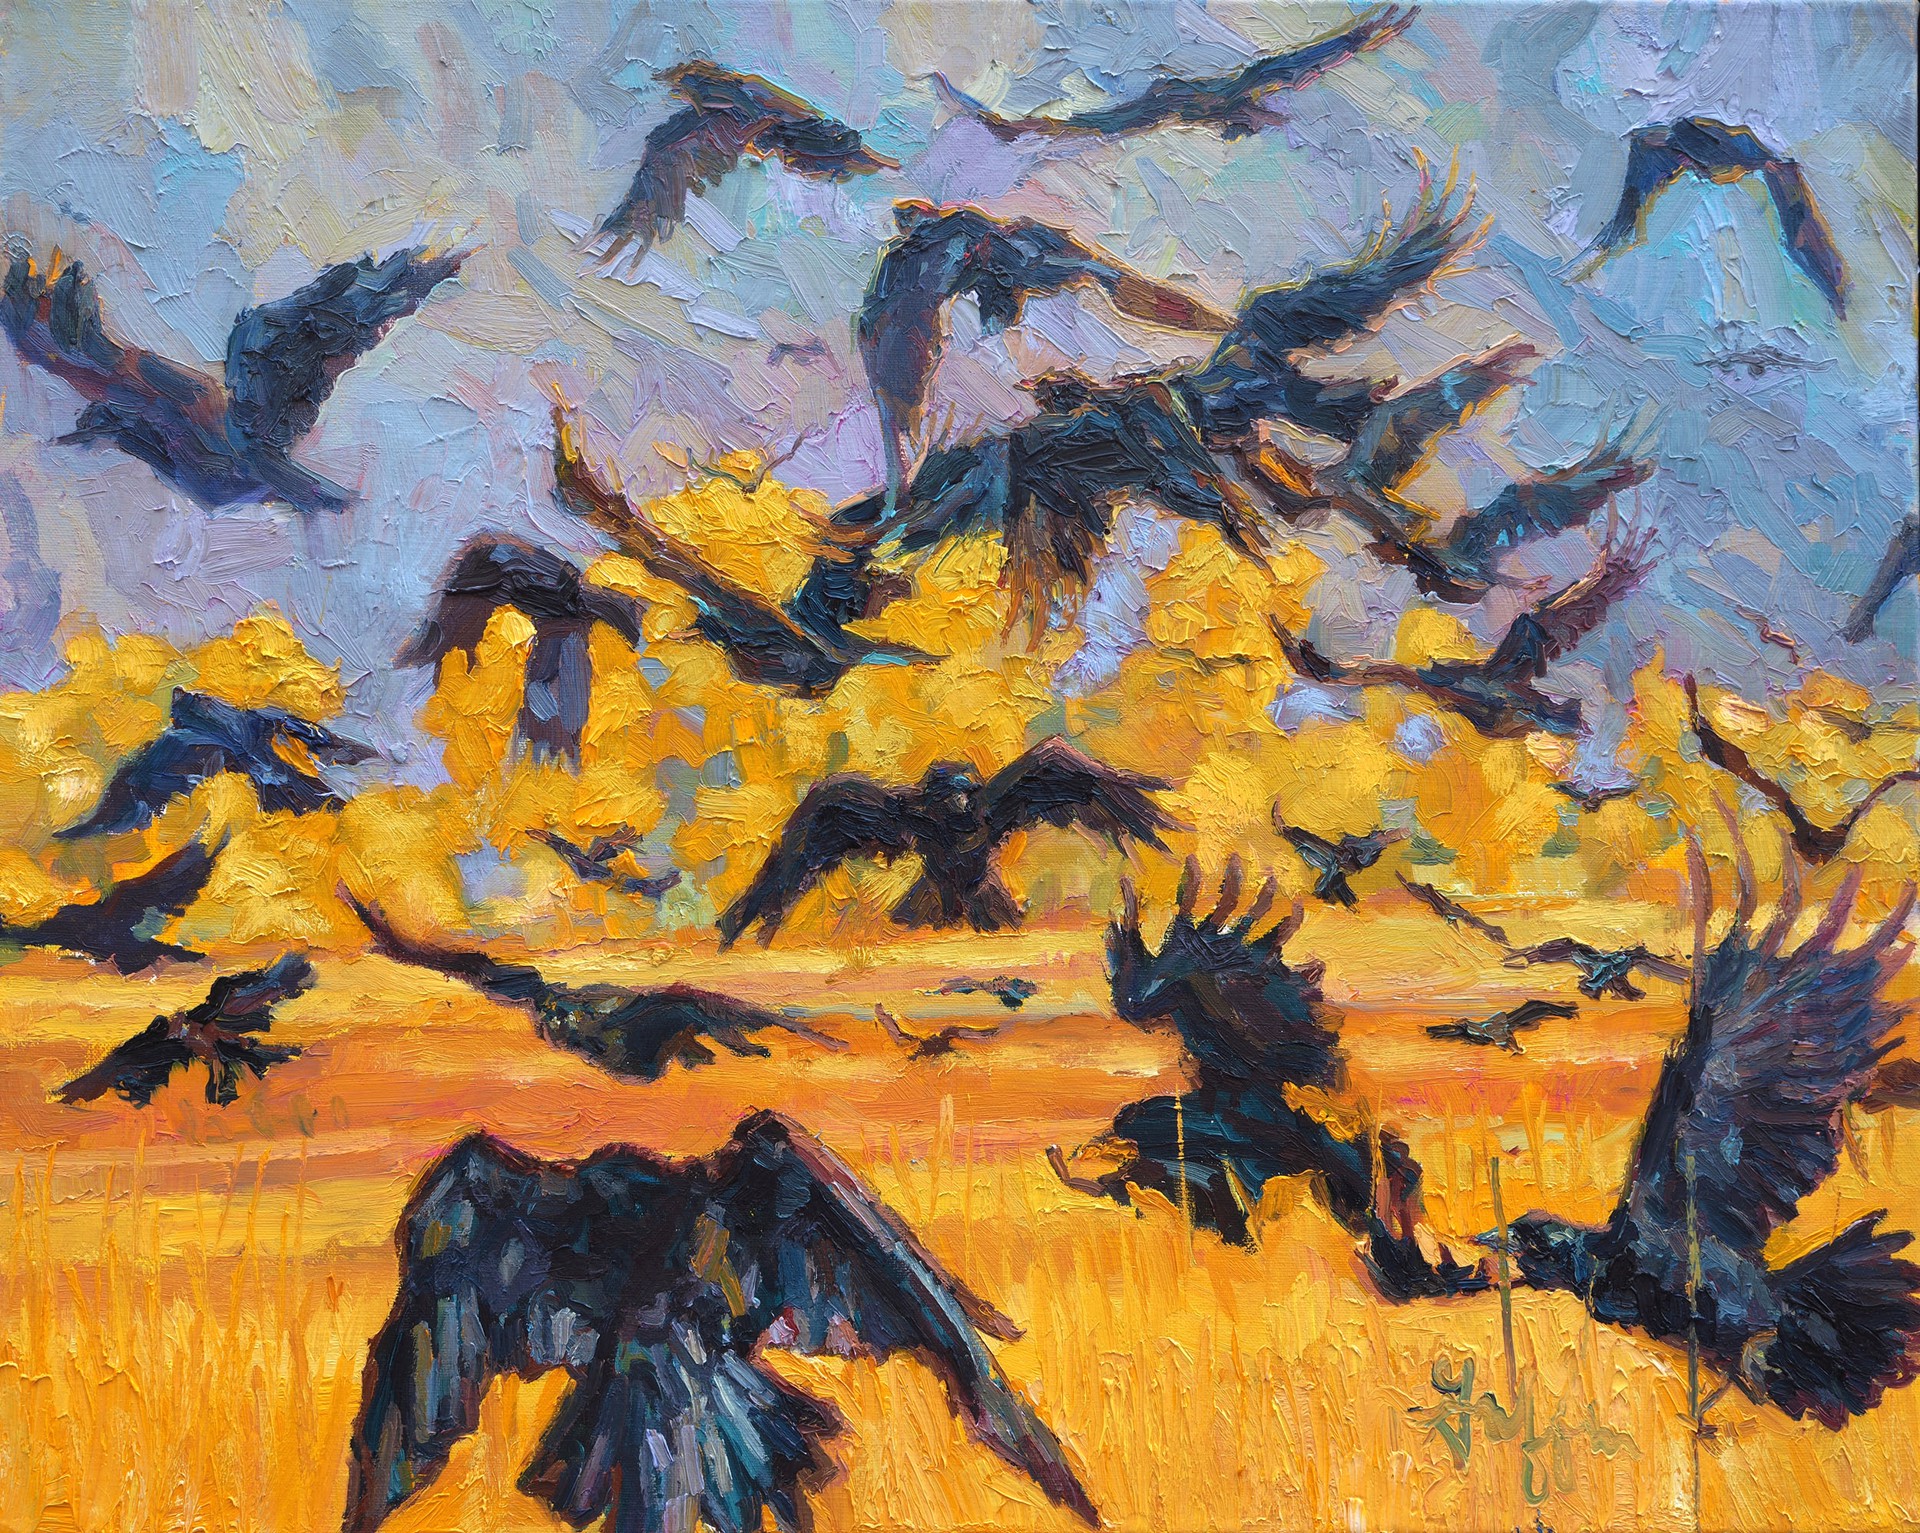 Original-Oil-On-Linen-Painting-In-A-Traditional-Graphic-Style-With-Black-Ravens-Flying-Above-A-Golden-Field-In-A-Meadow-With-Mountains